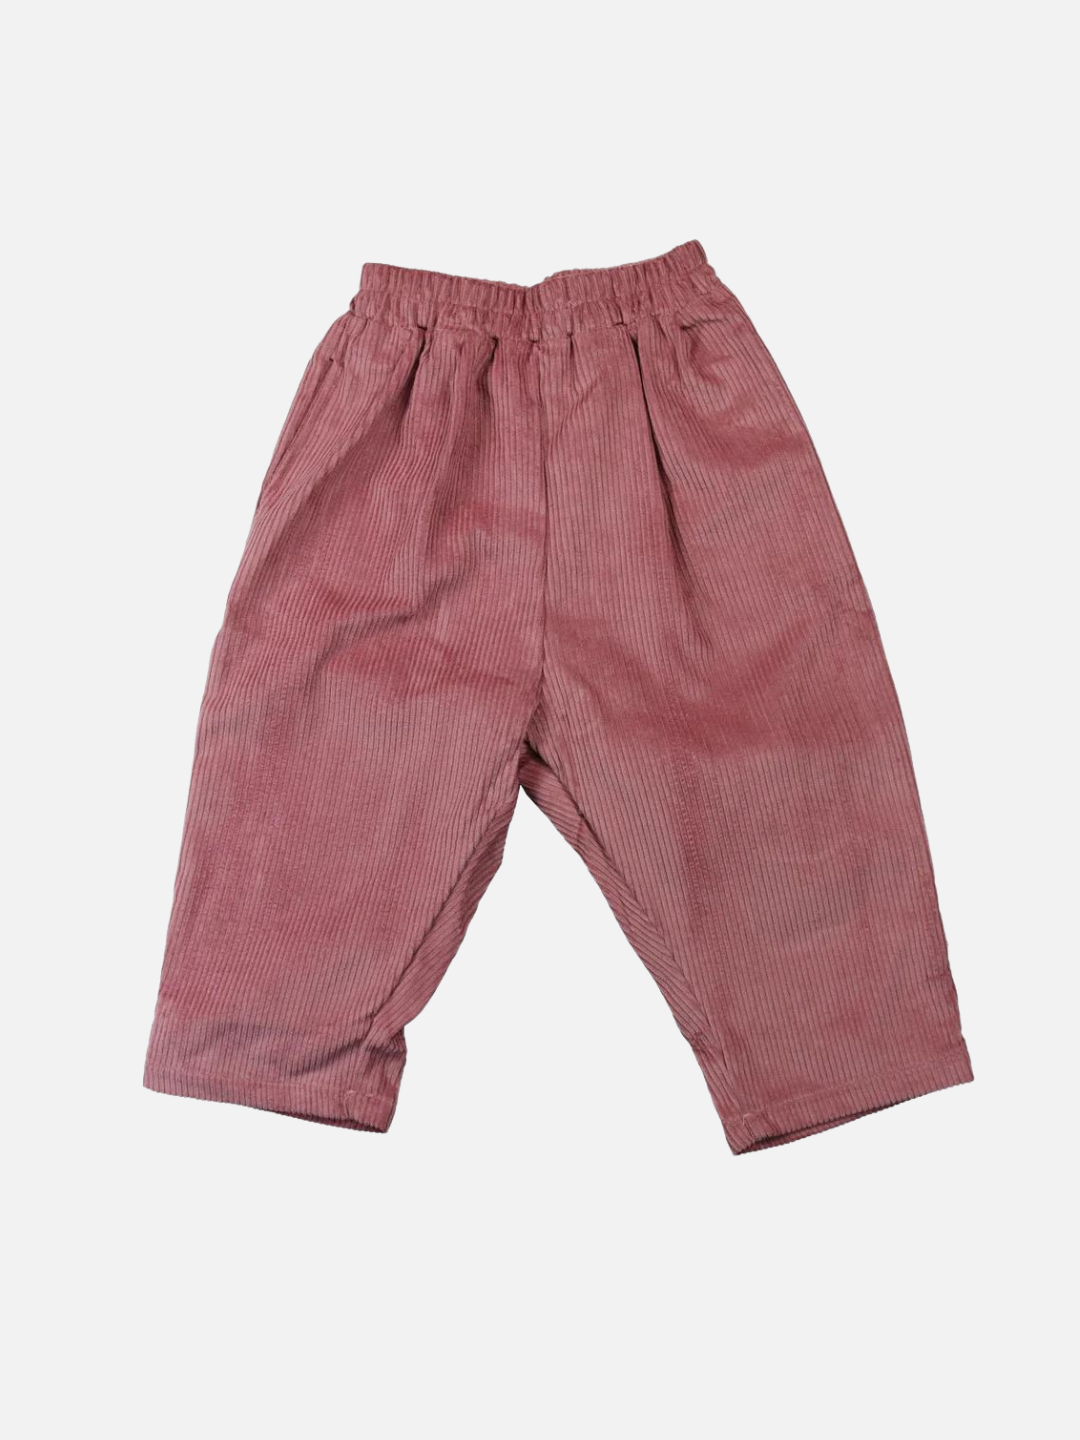 Dusty pink kids' pants, front view